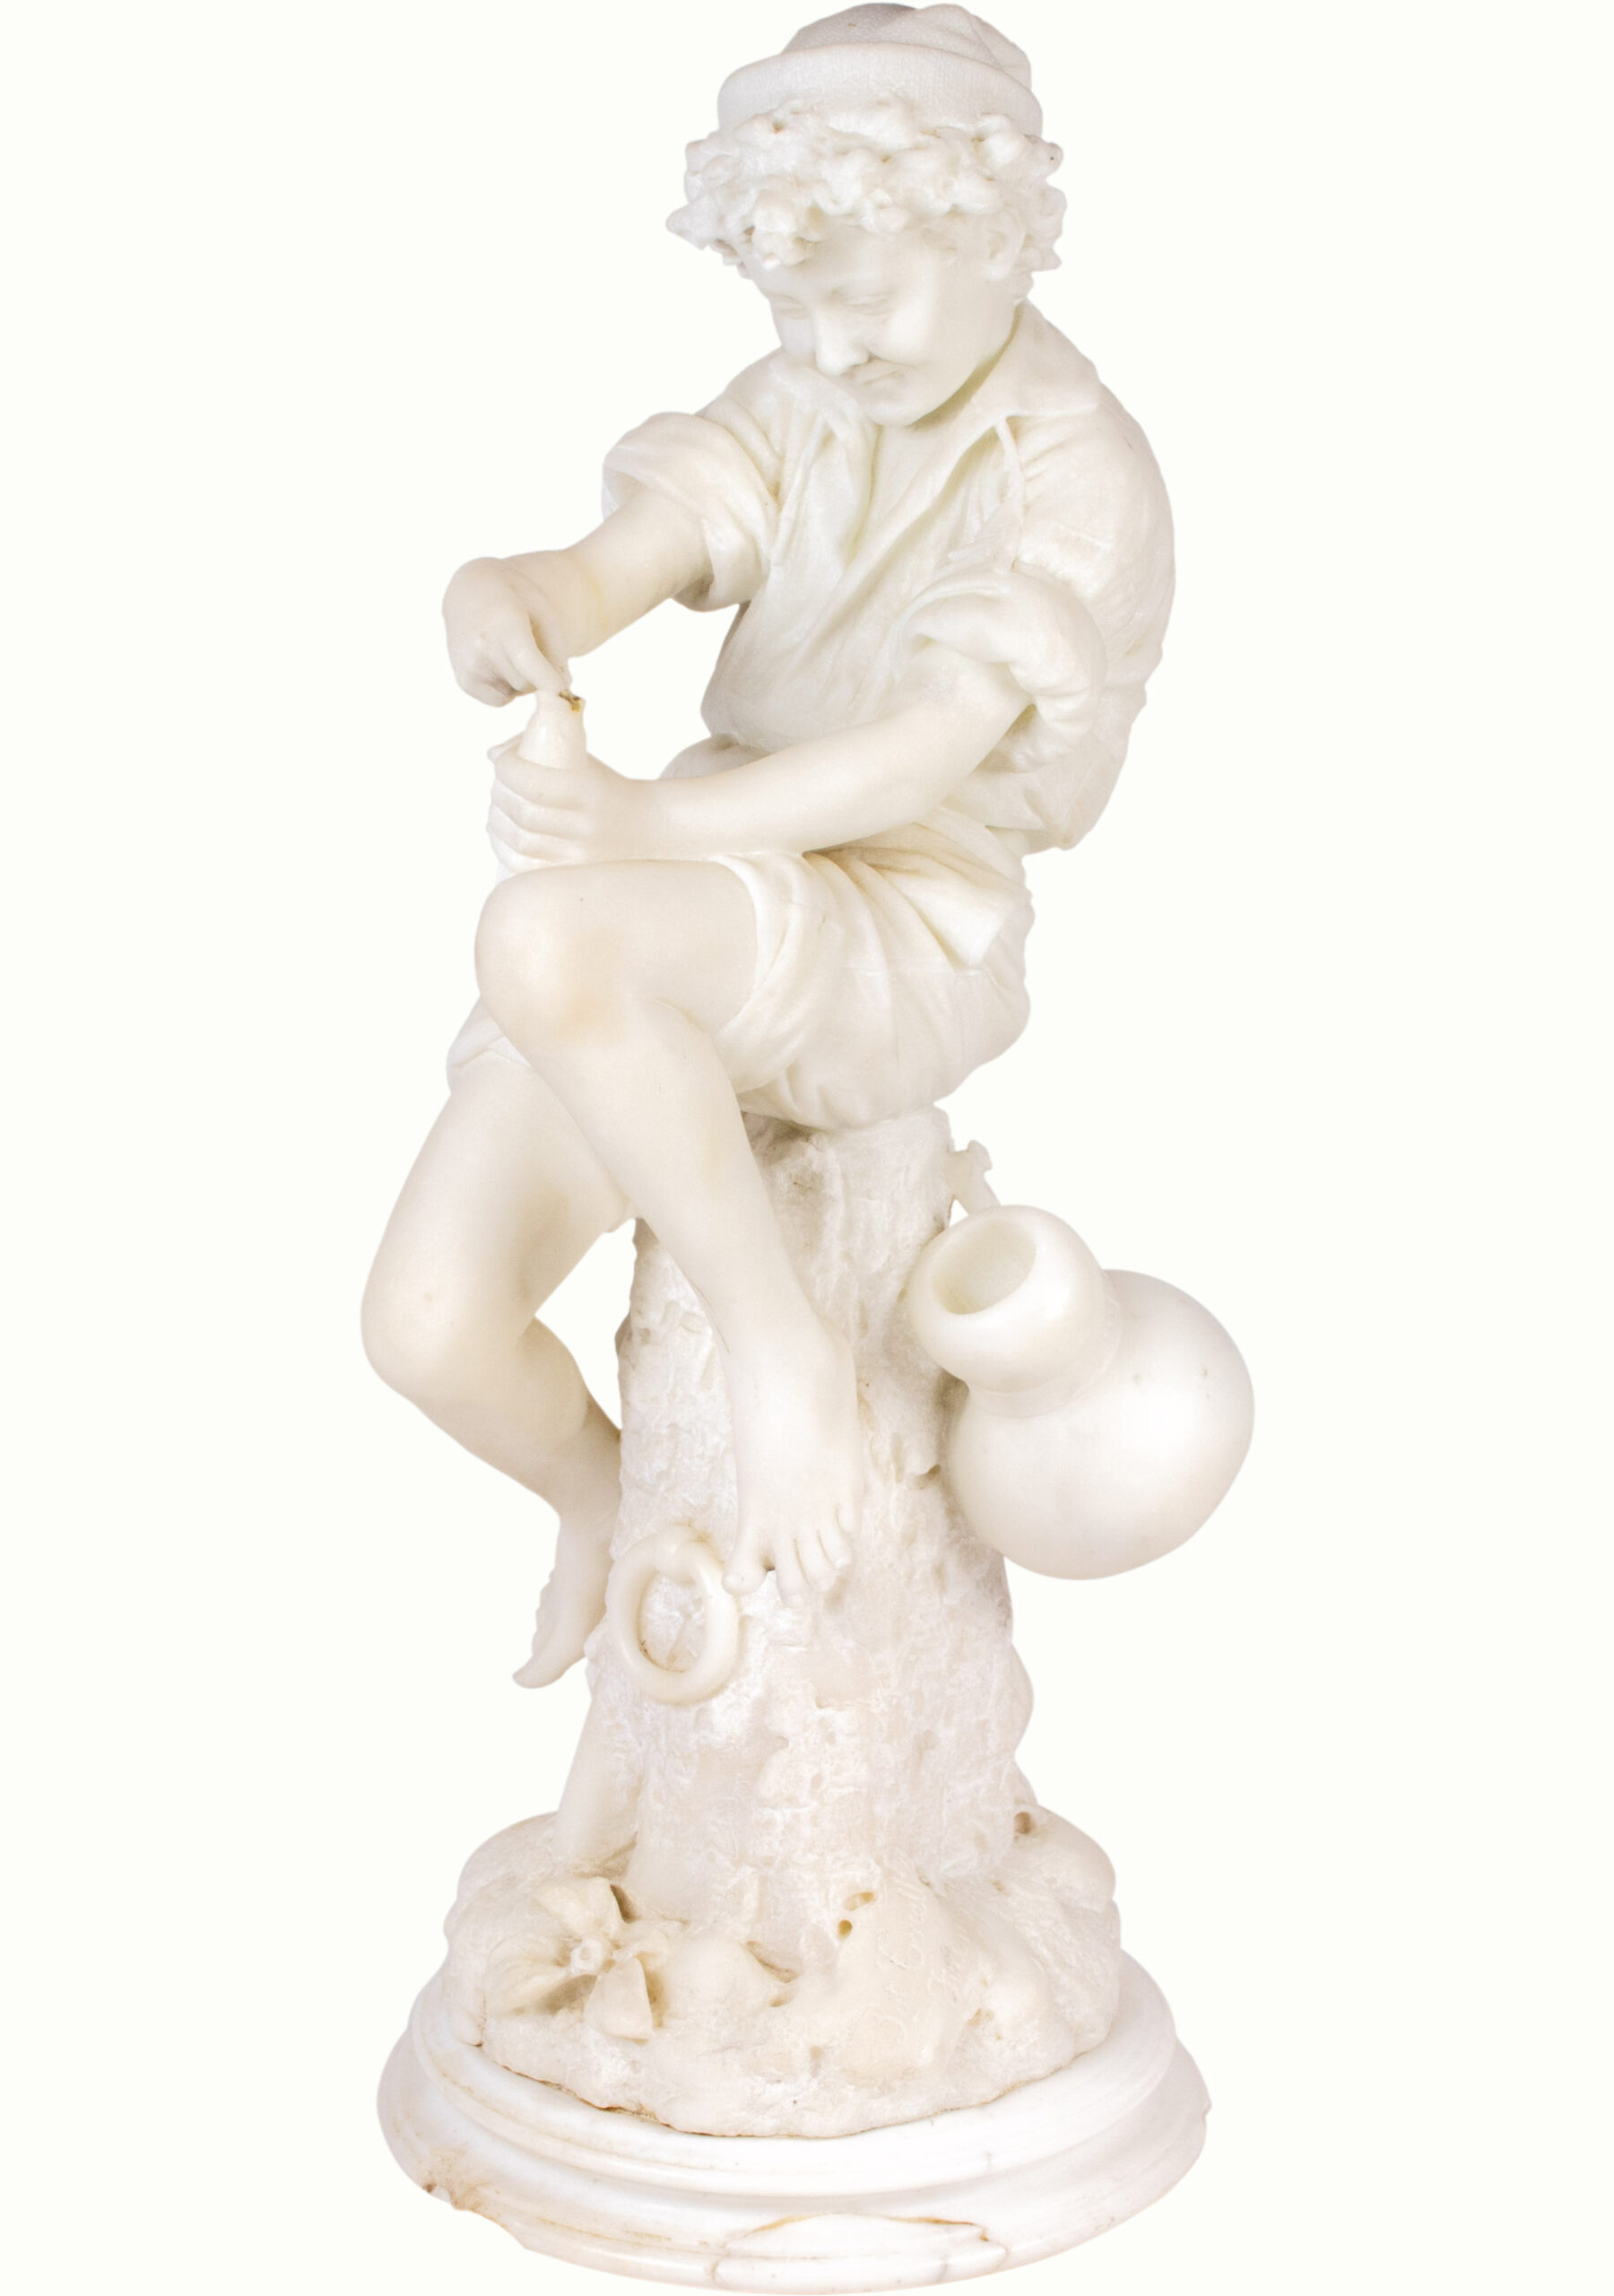 An Italian alabaster figure of a boy fishing by Lorenzo Corelli. Provenance: From the Estate of Harvey Clar.